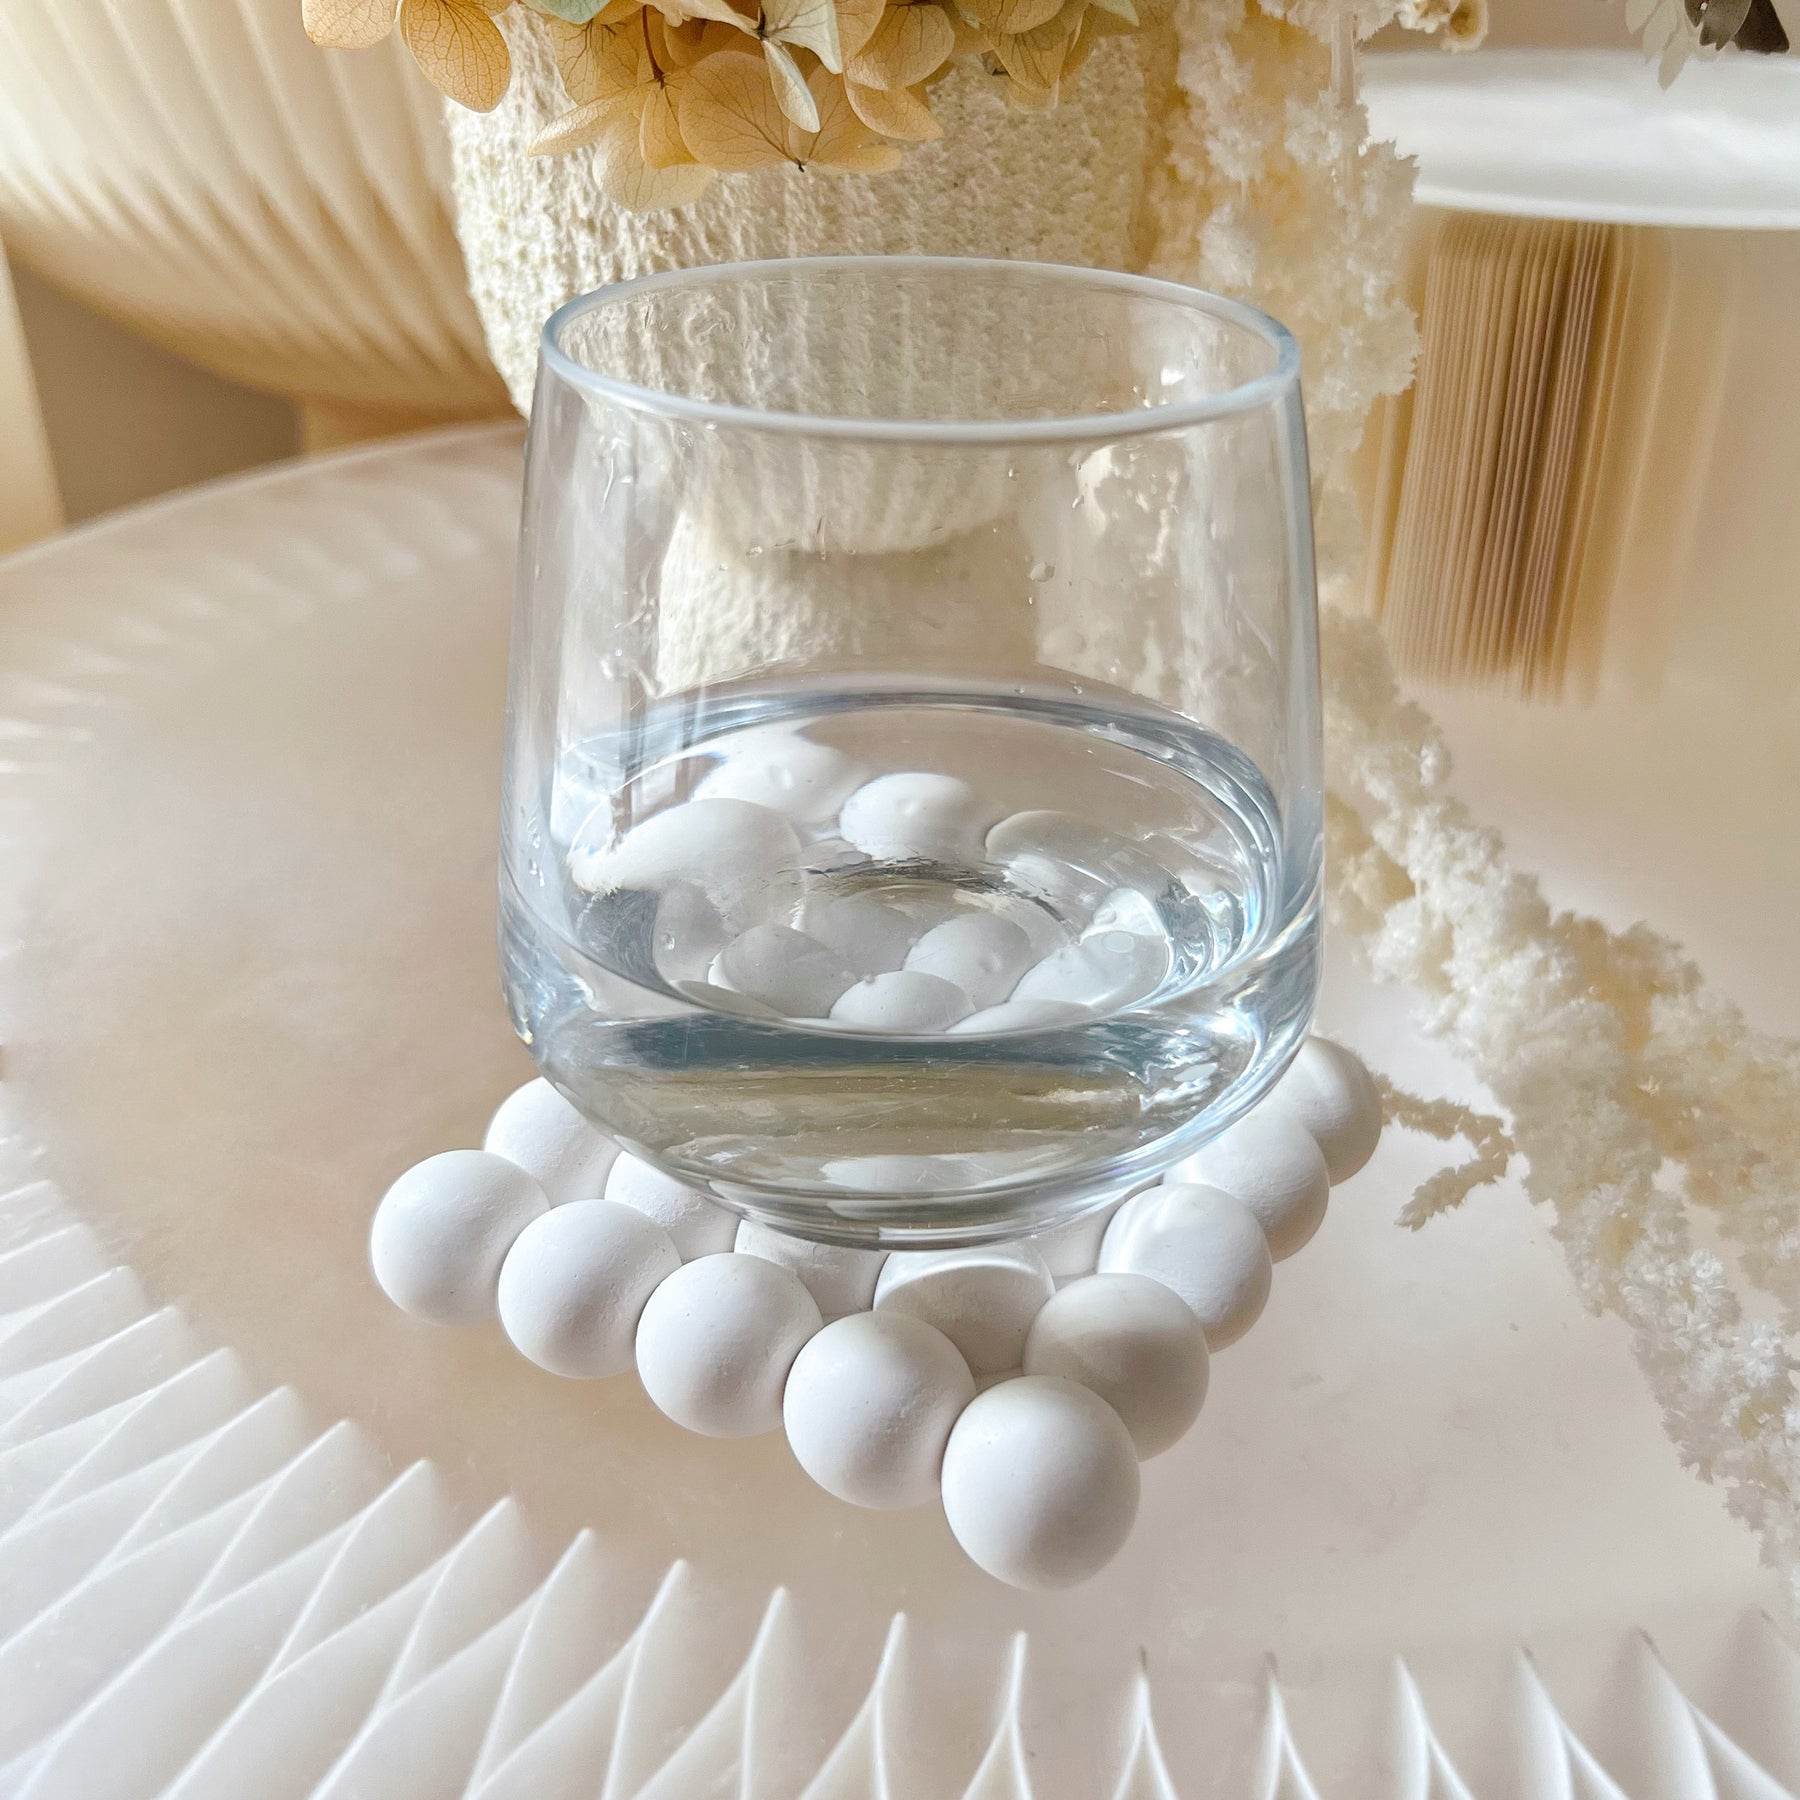 Handcrafted Trinket Dish - Bubble Shaped Coaster | LMJ Candles